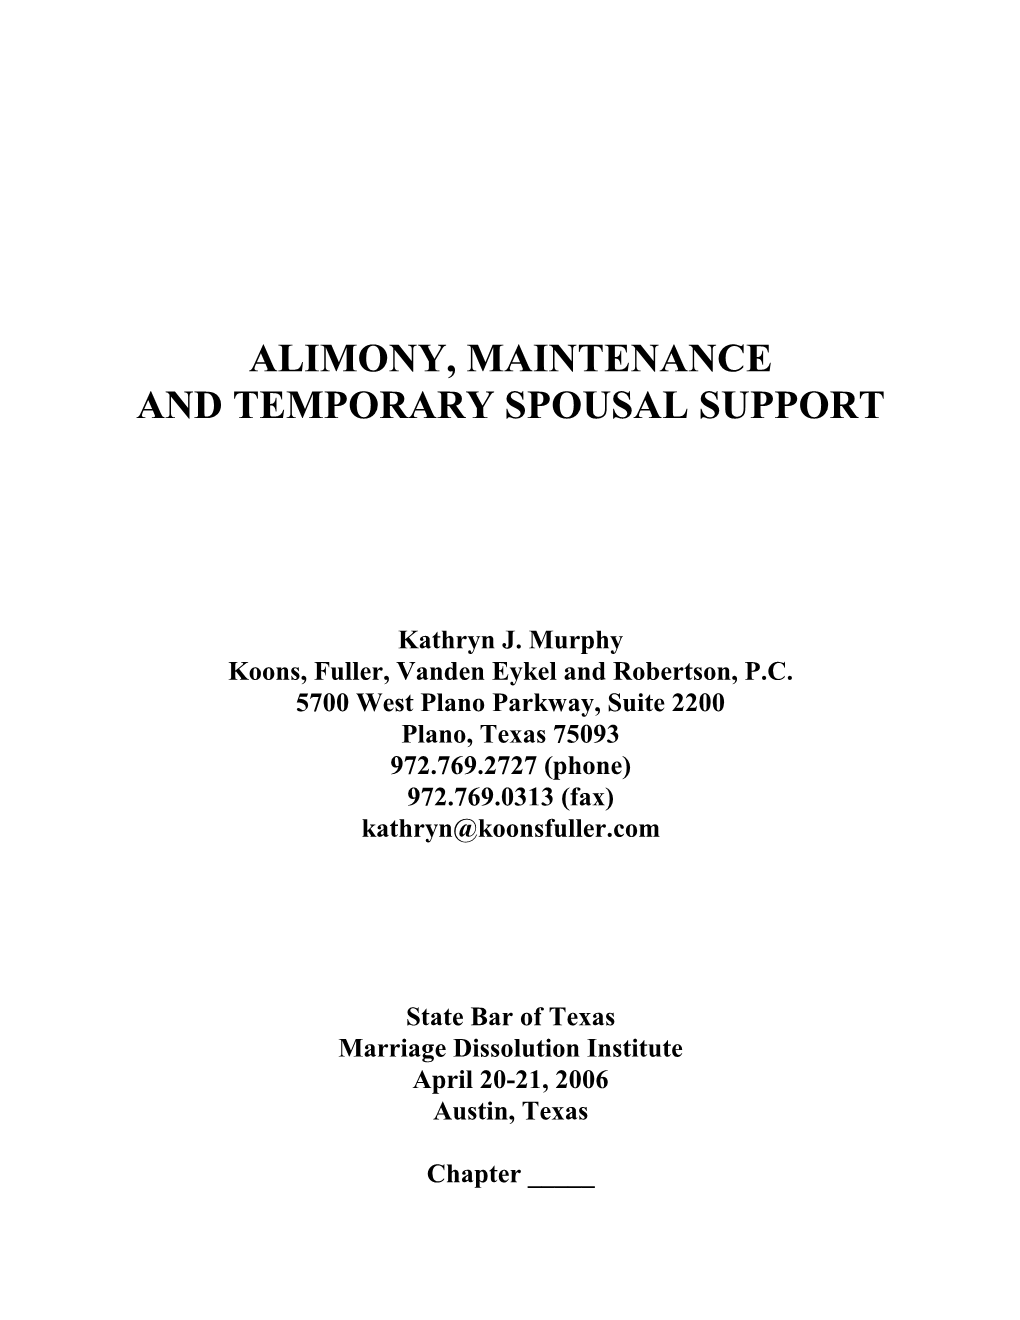 Alimony, Maintenance and Temporary Spousal Support